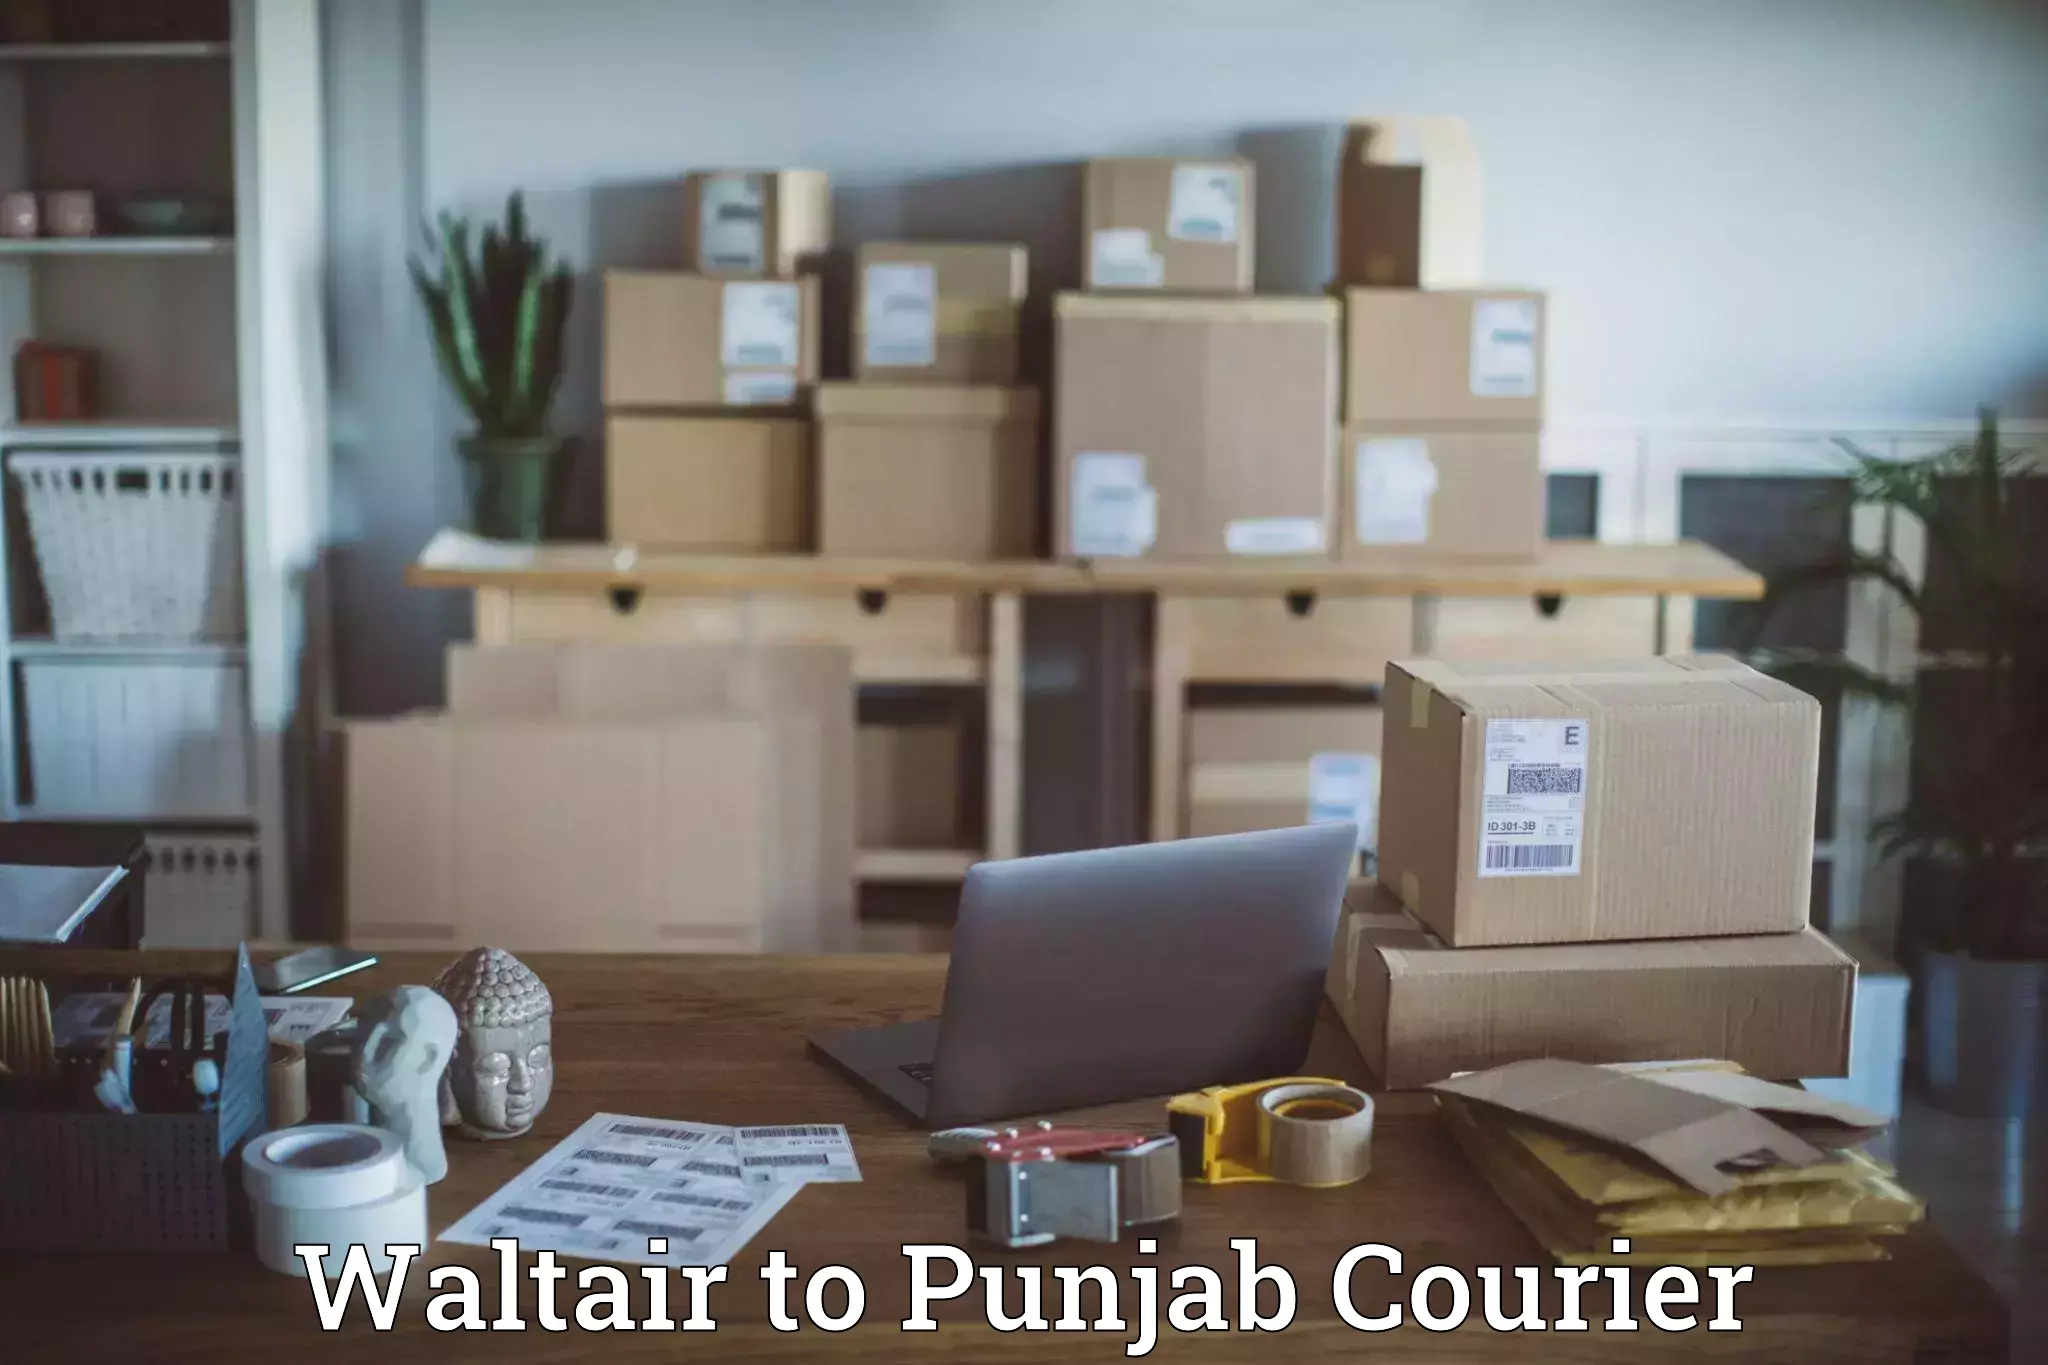 Advanced shipping technology Waltair to Punjab